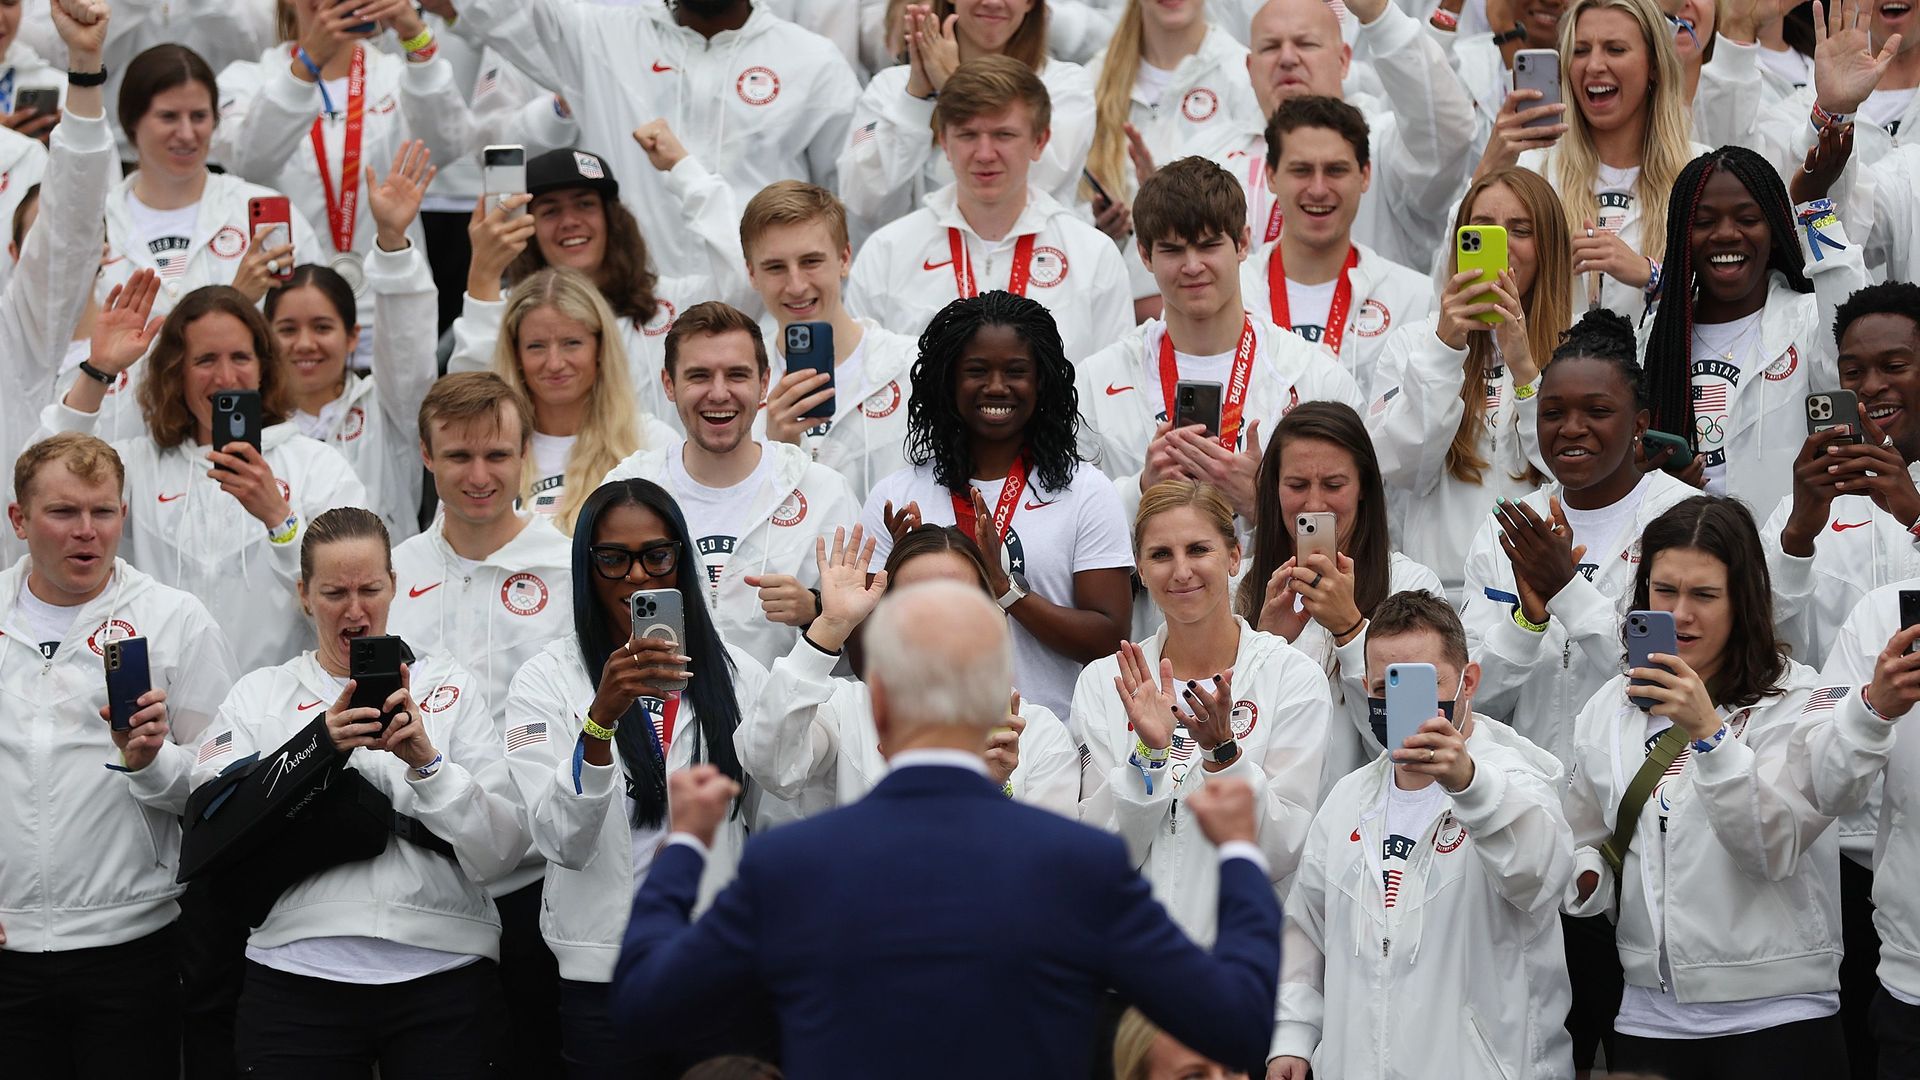 President Biden is seen addressing the U.S. Olympic team as it visited the White House.